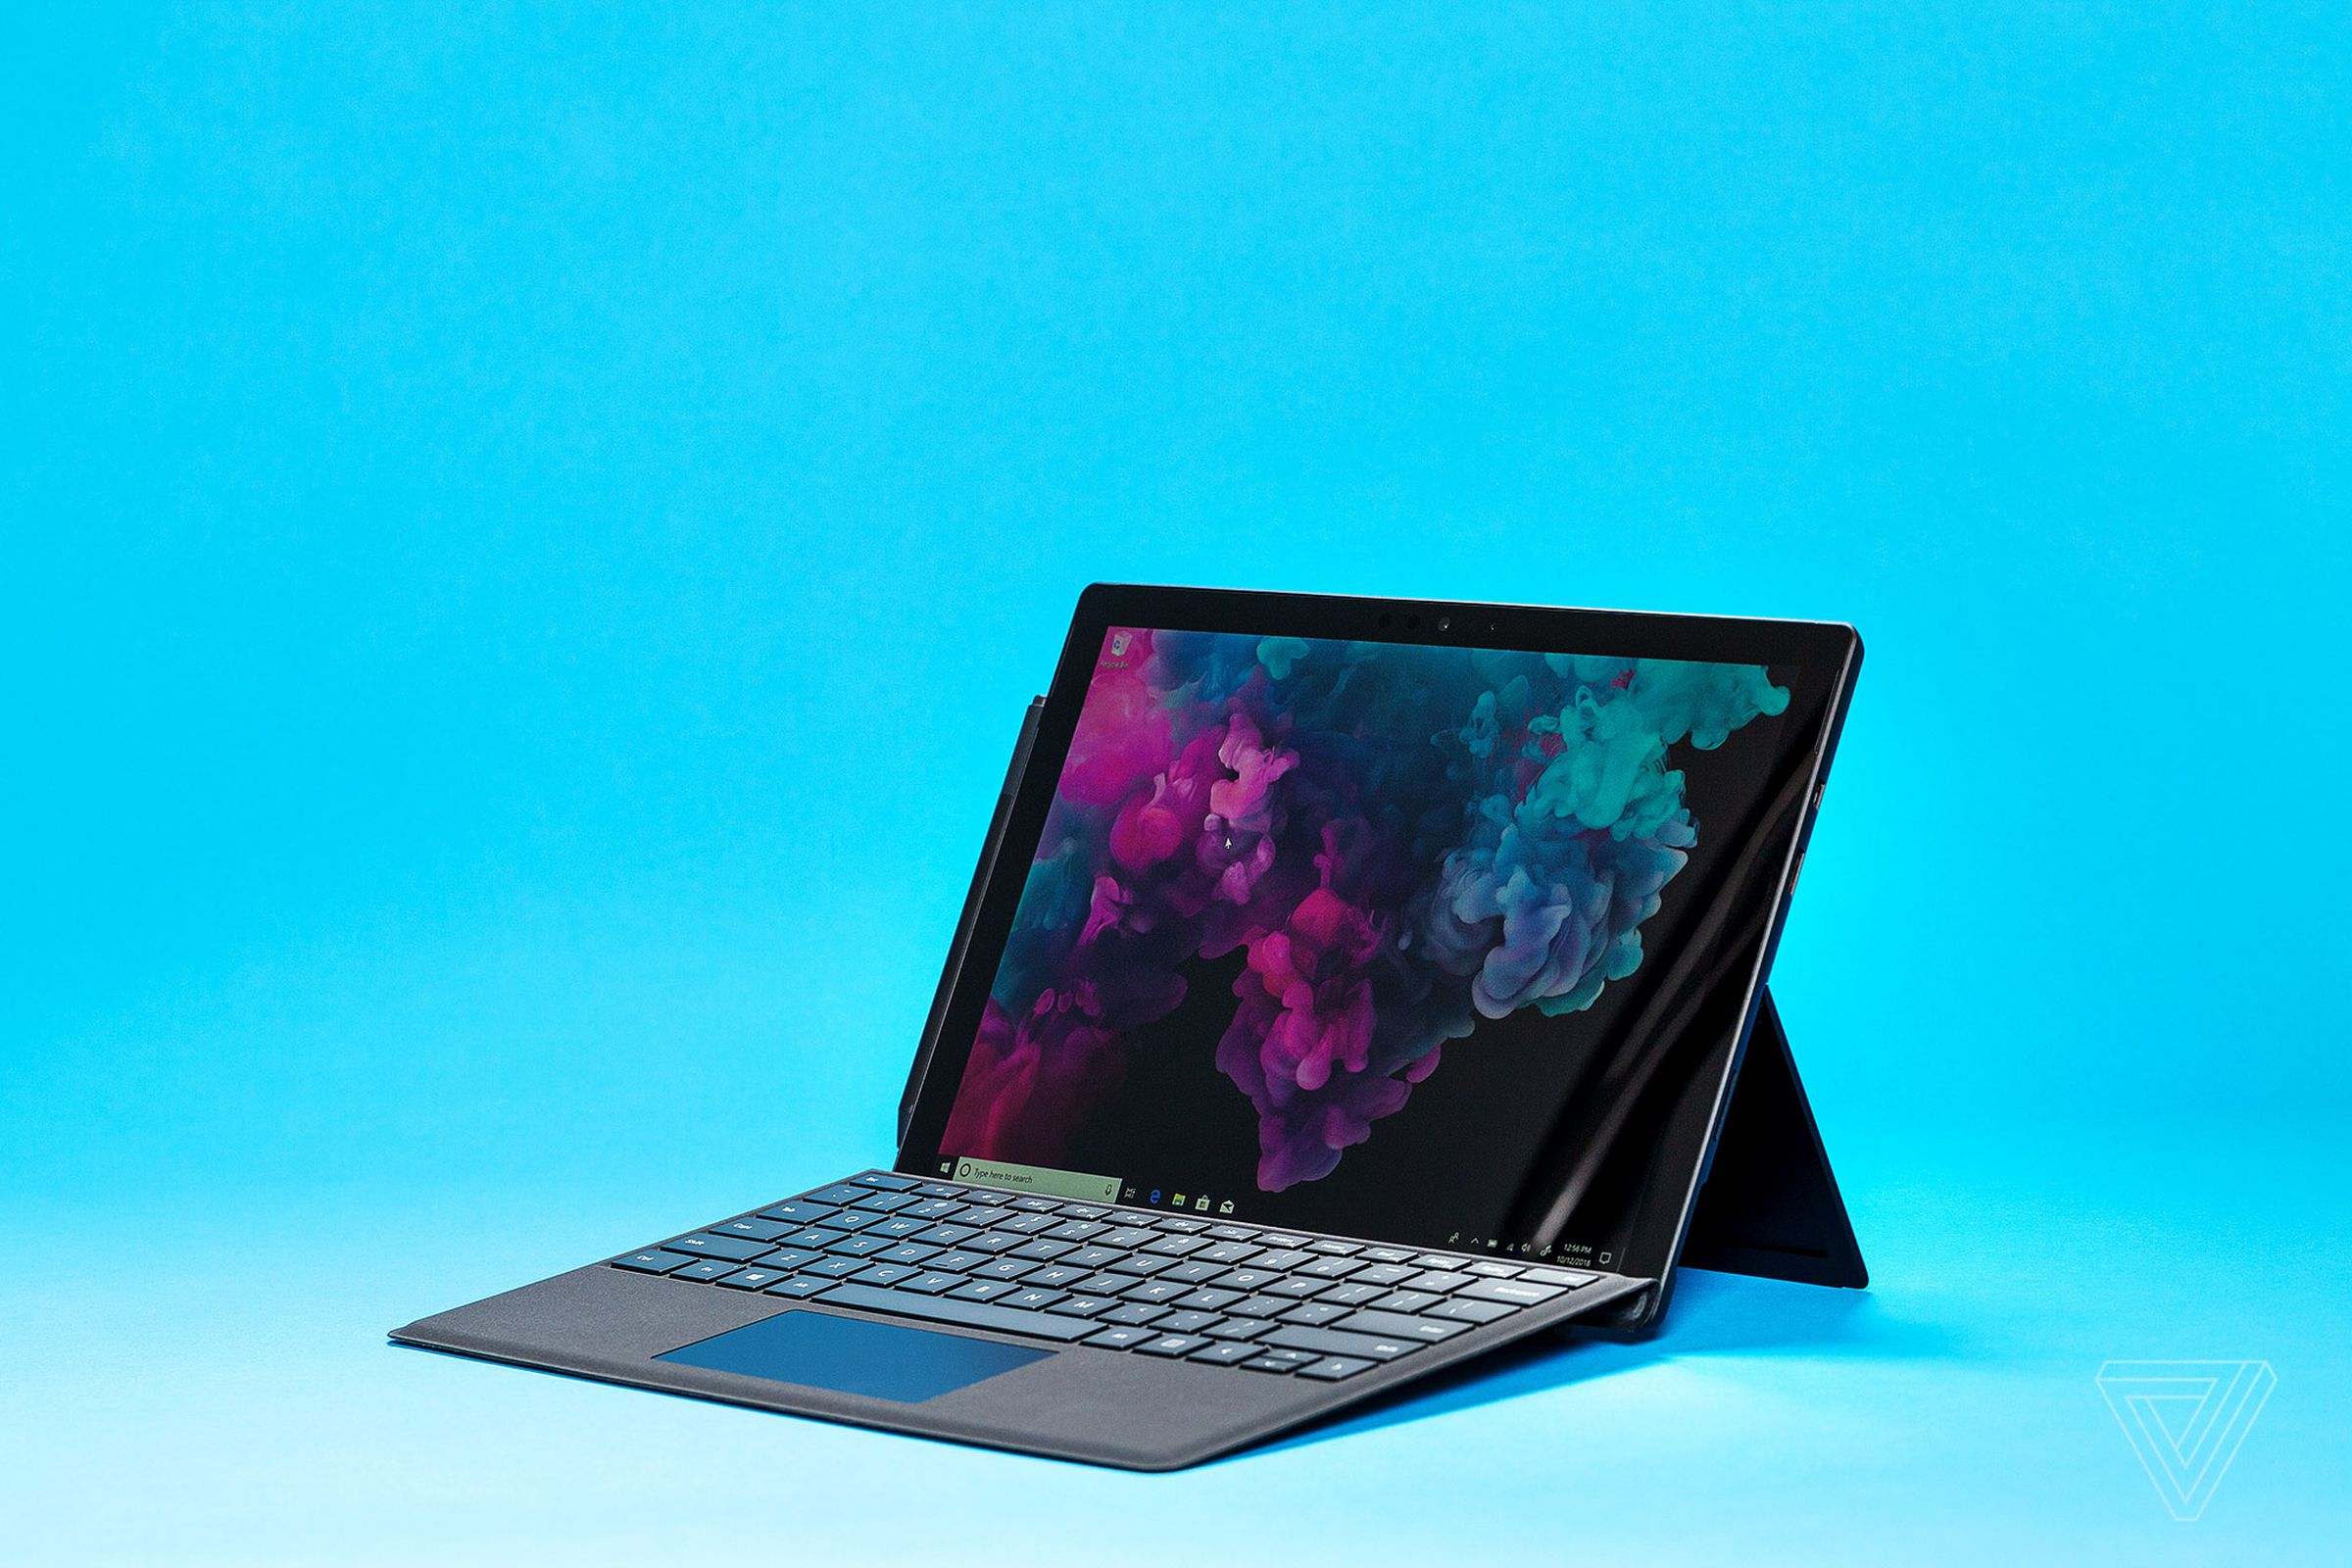 The 2018 Surface Pro 6, powered by Windows 10